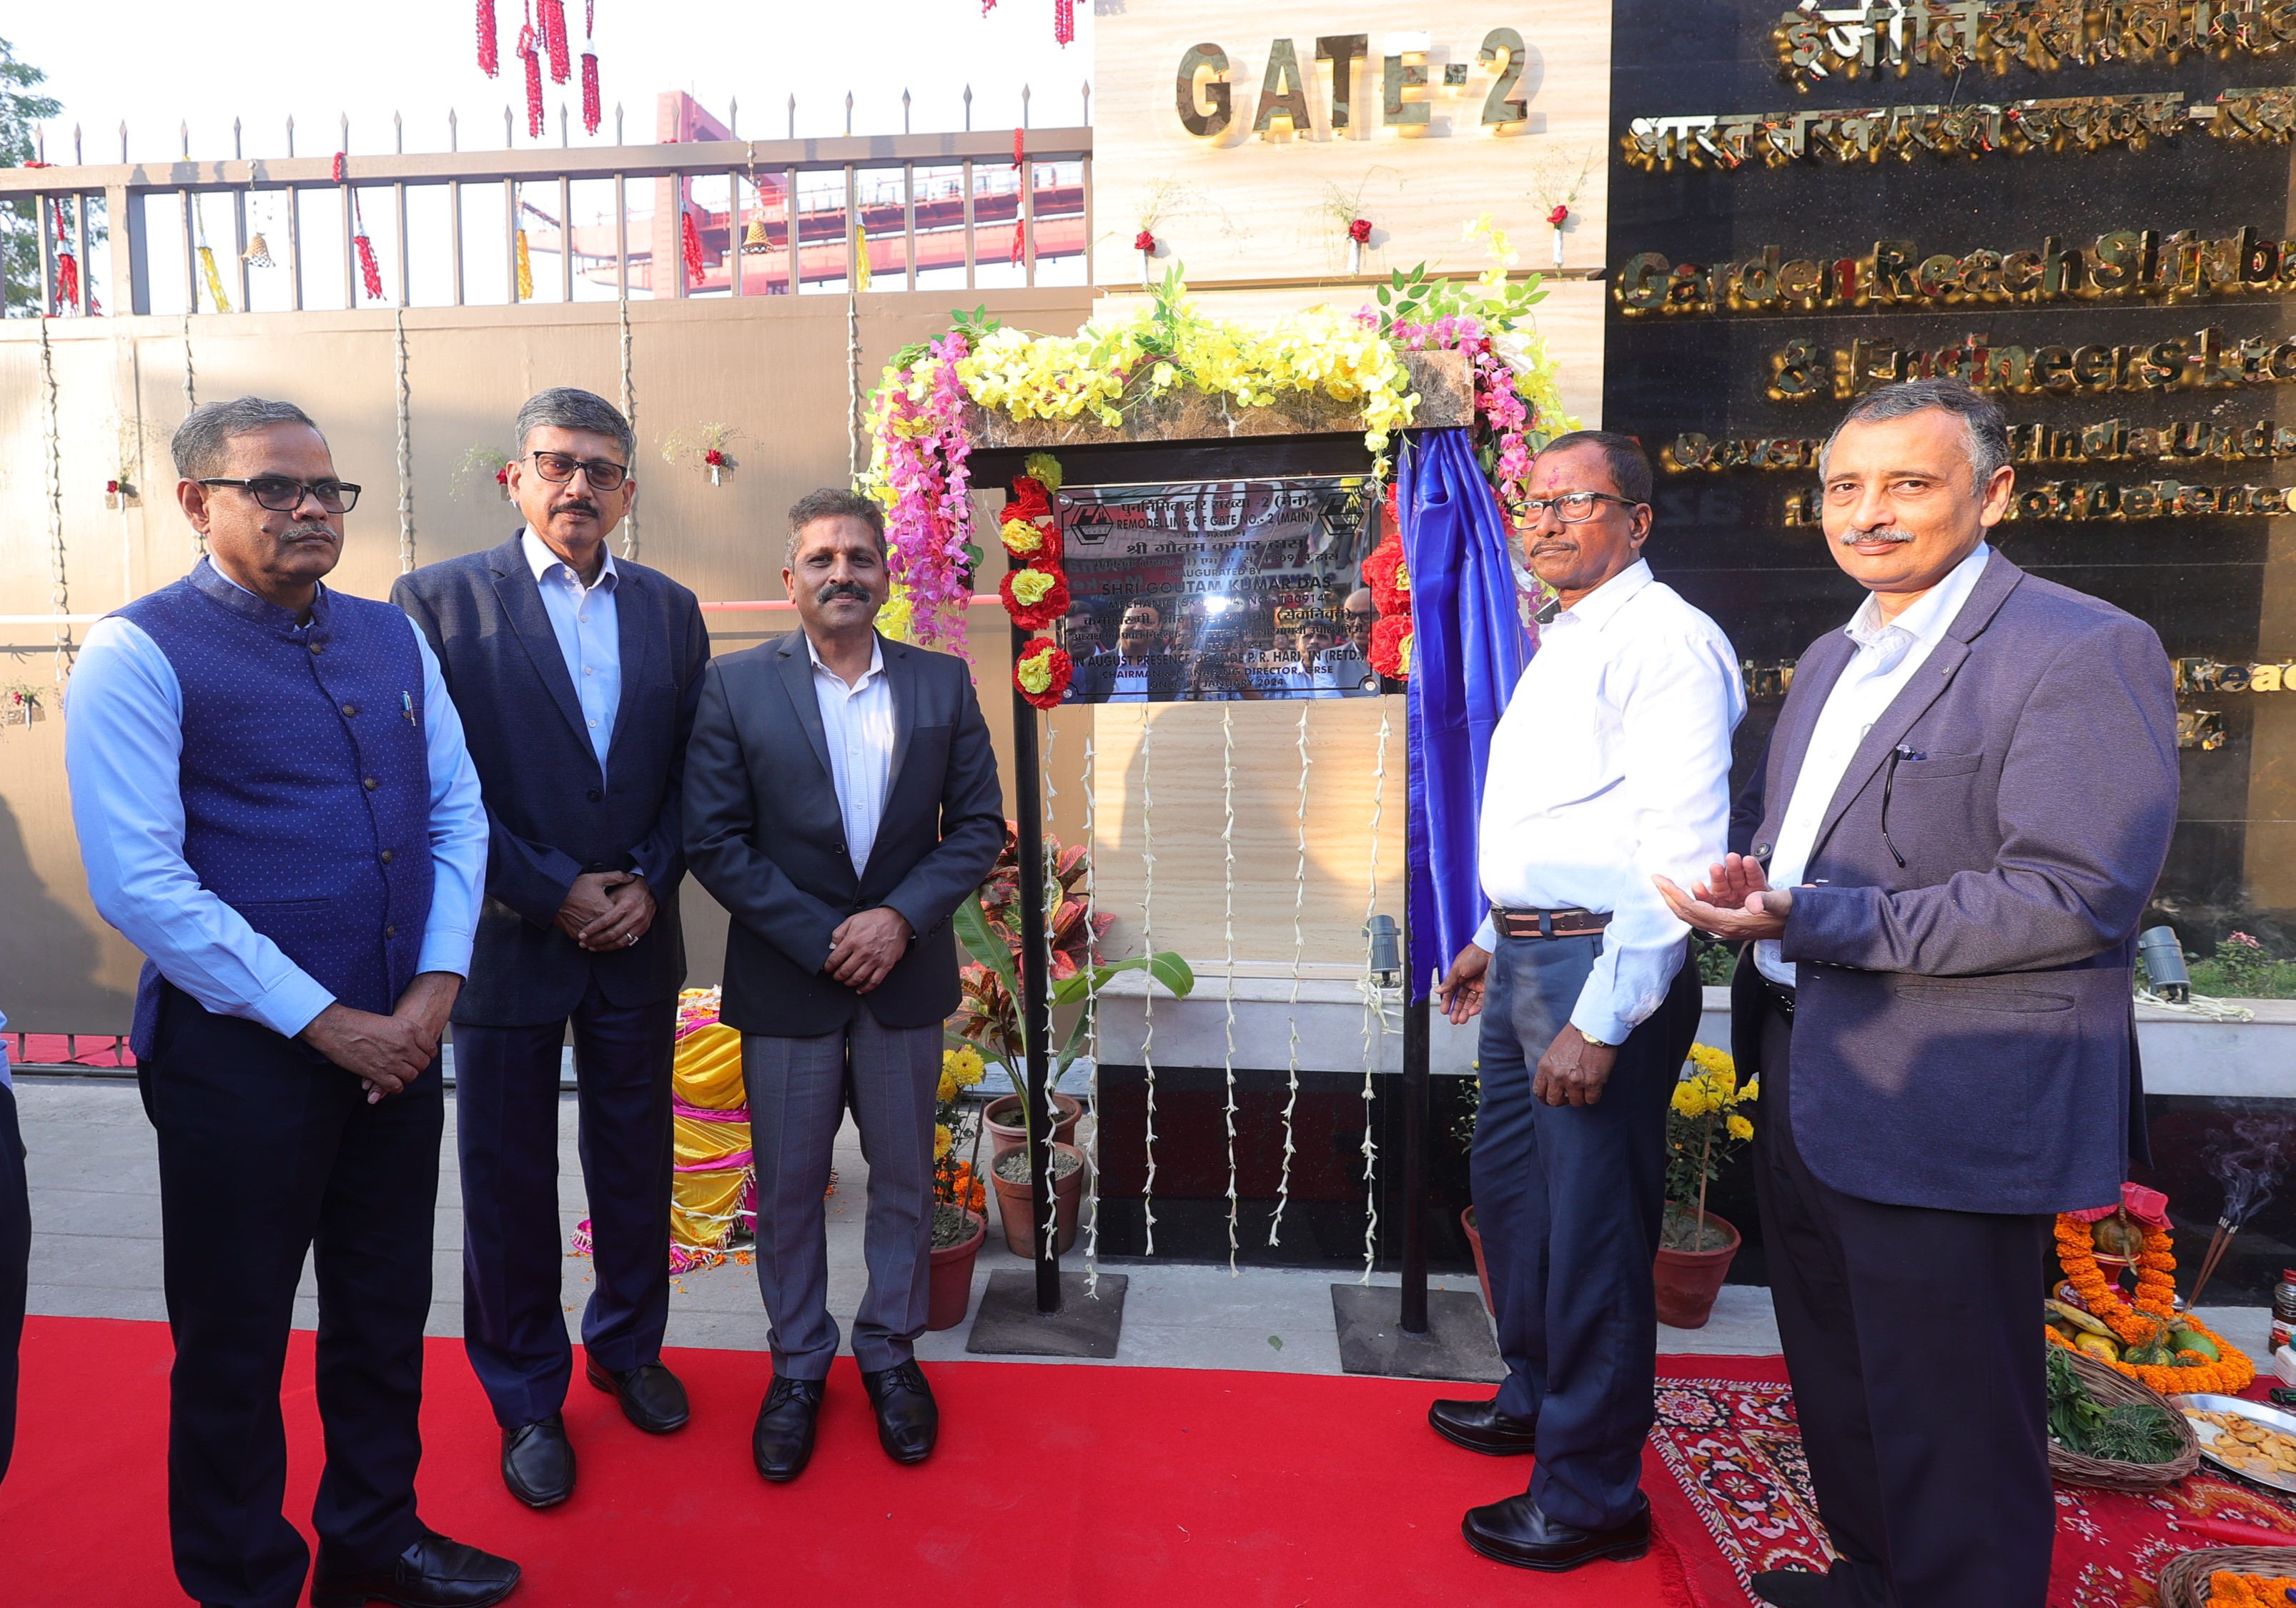 Opening doors to New Possibilities GRSE celebrates The Grand Inauguration of Gate-2 at Main Works Unit on 02 Jan 24